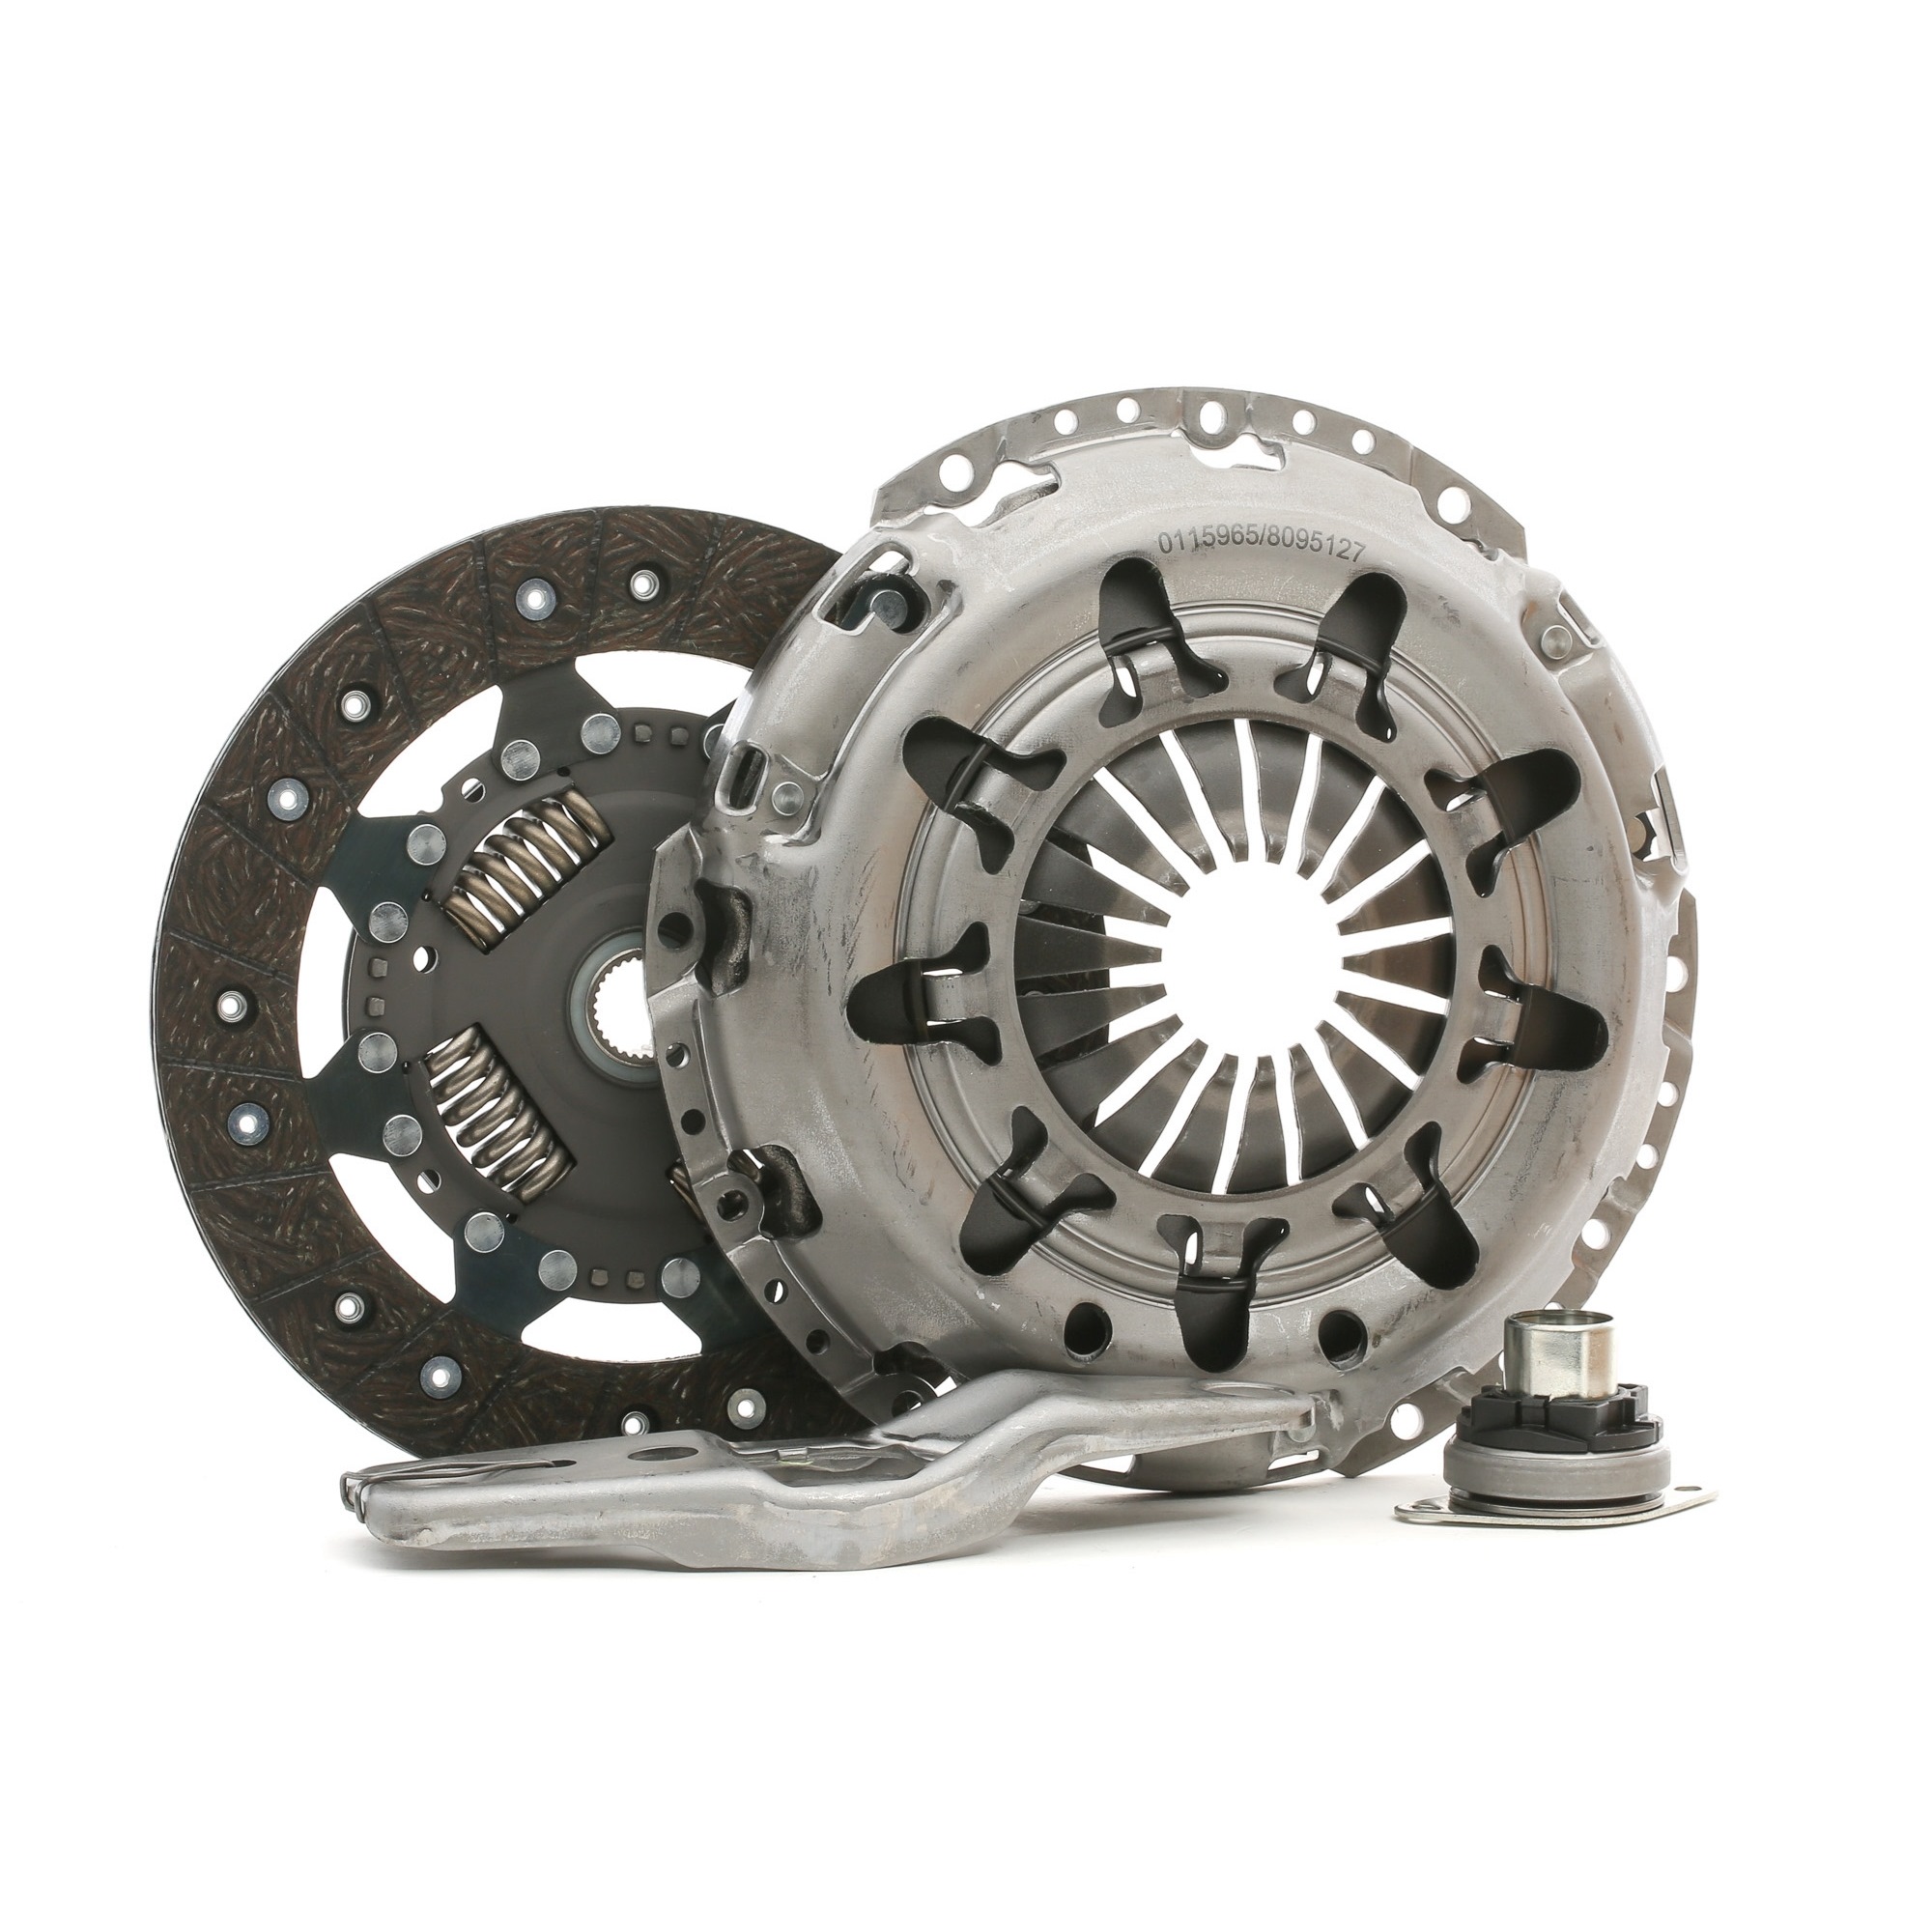 STARK SKCK-0100137 Clutch kit with clutch disc, with clutch release bearing, with release fork, 220mm